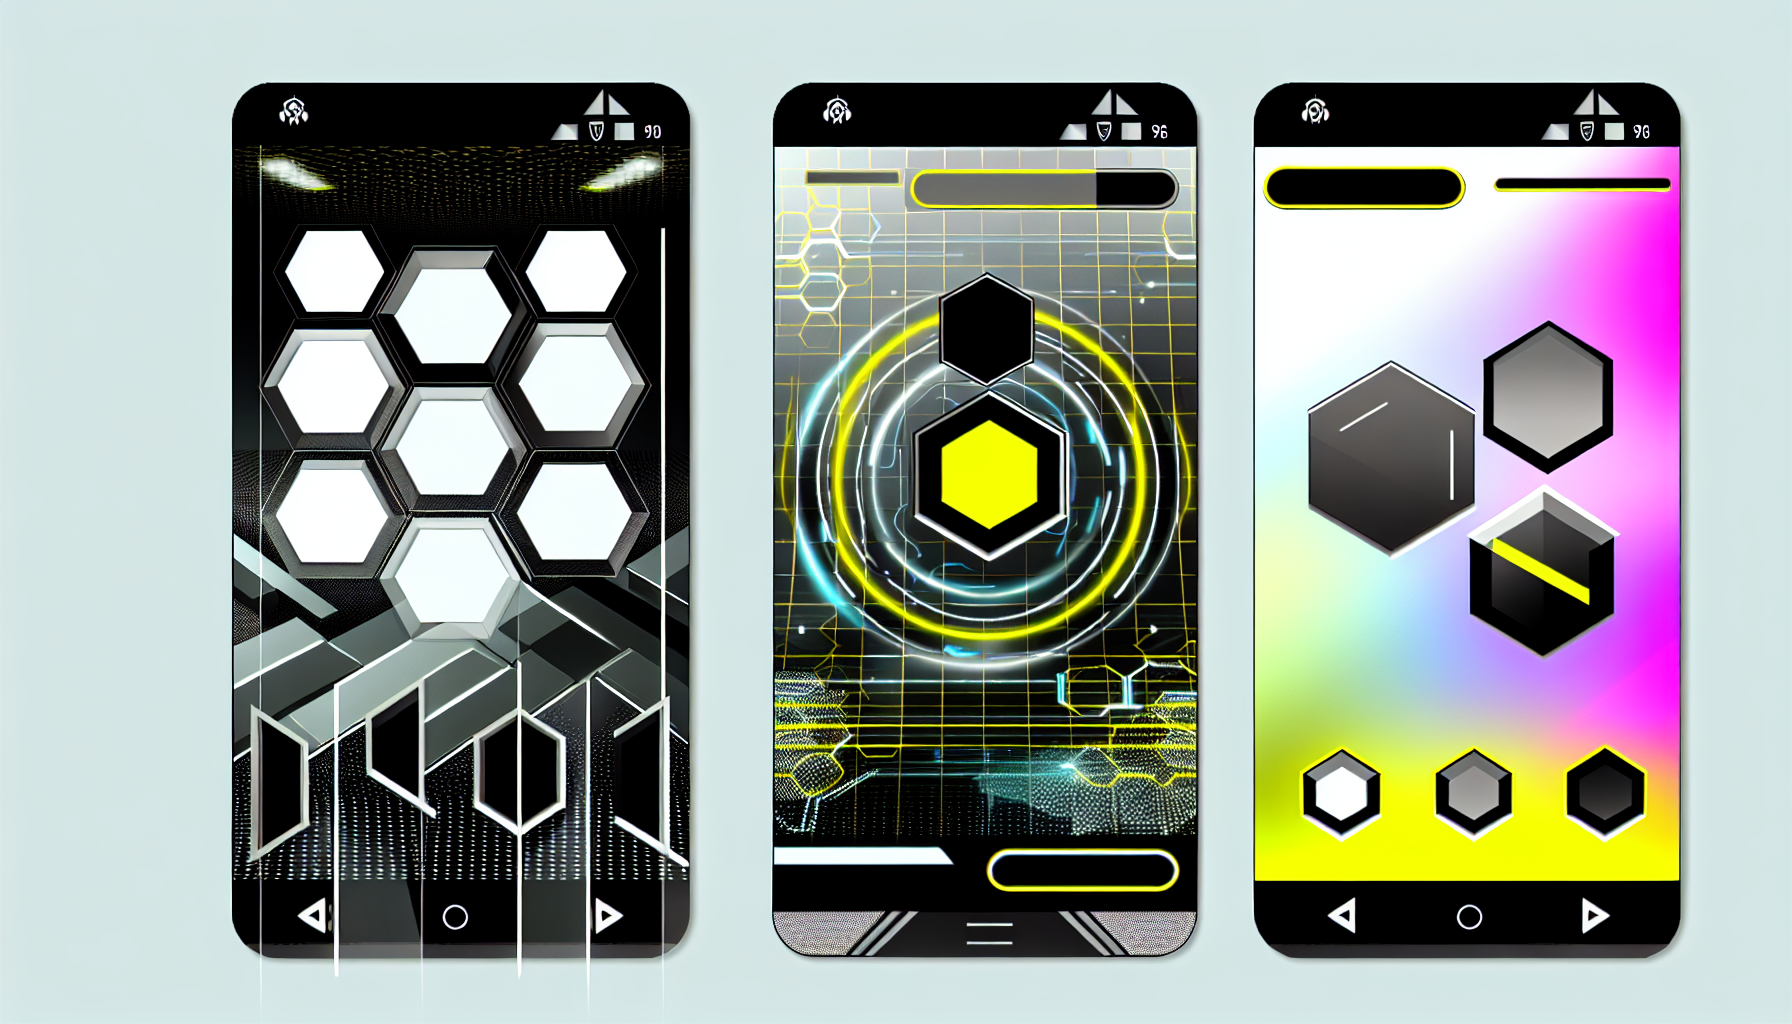 A futuristic Android app interface designed by Bee Techy